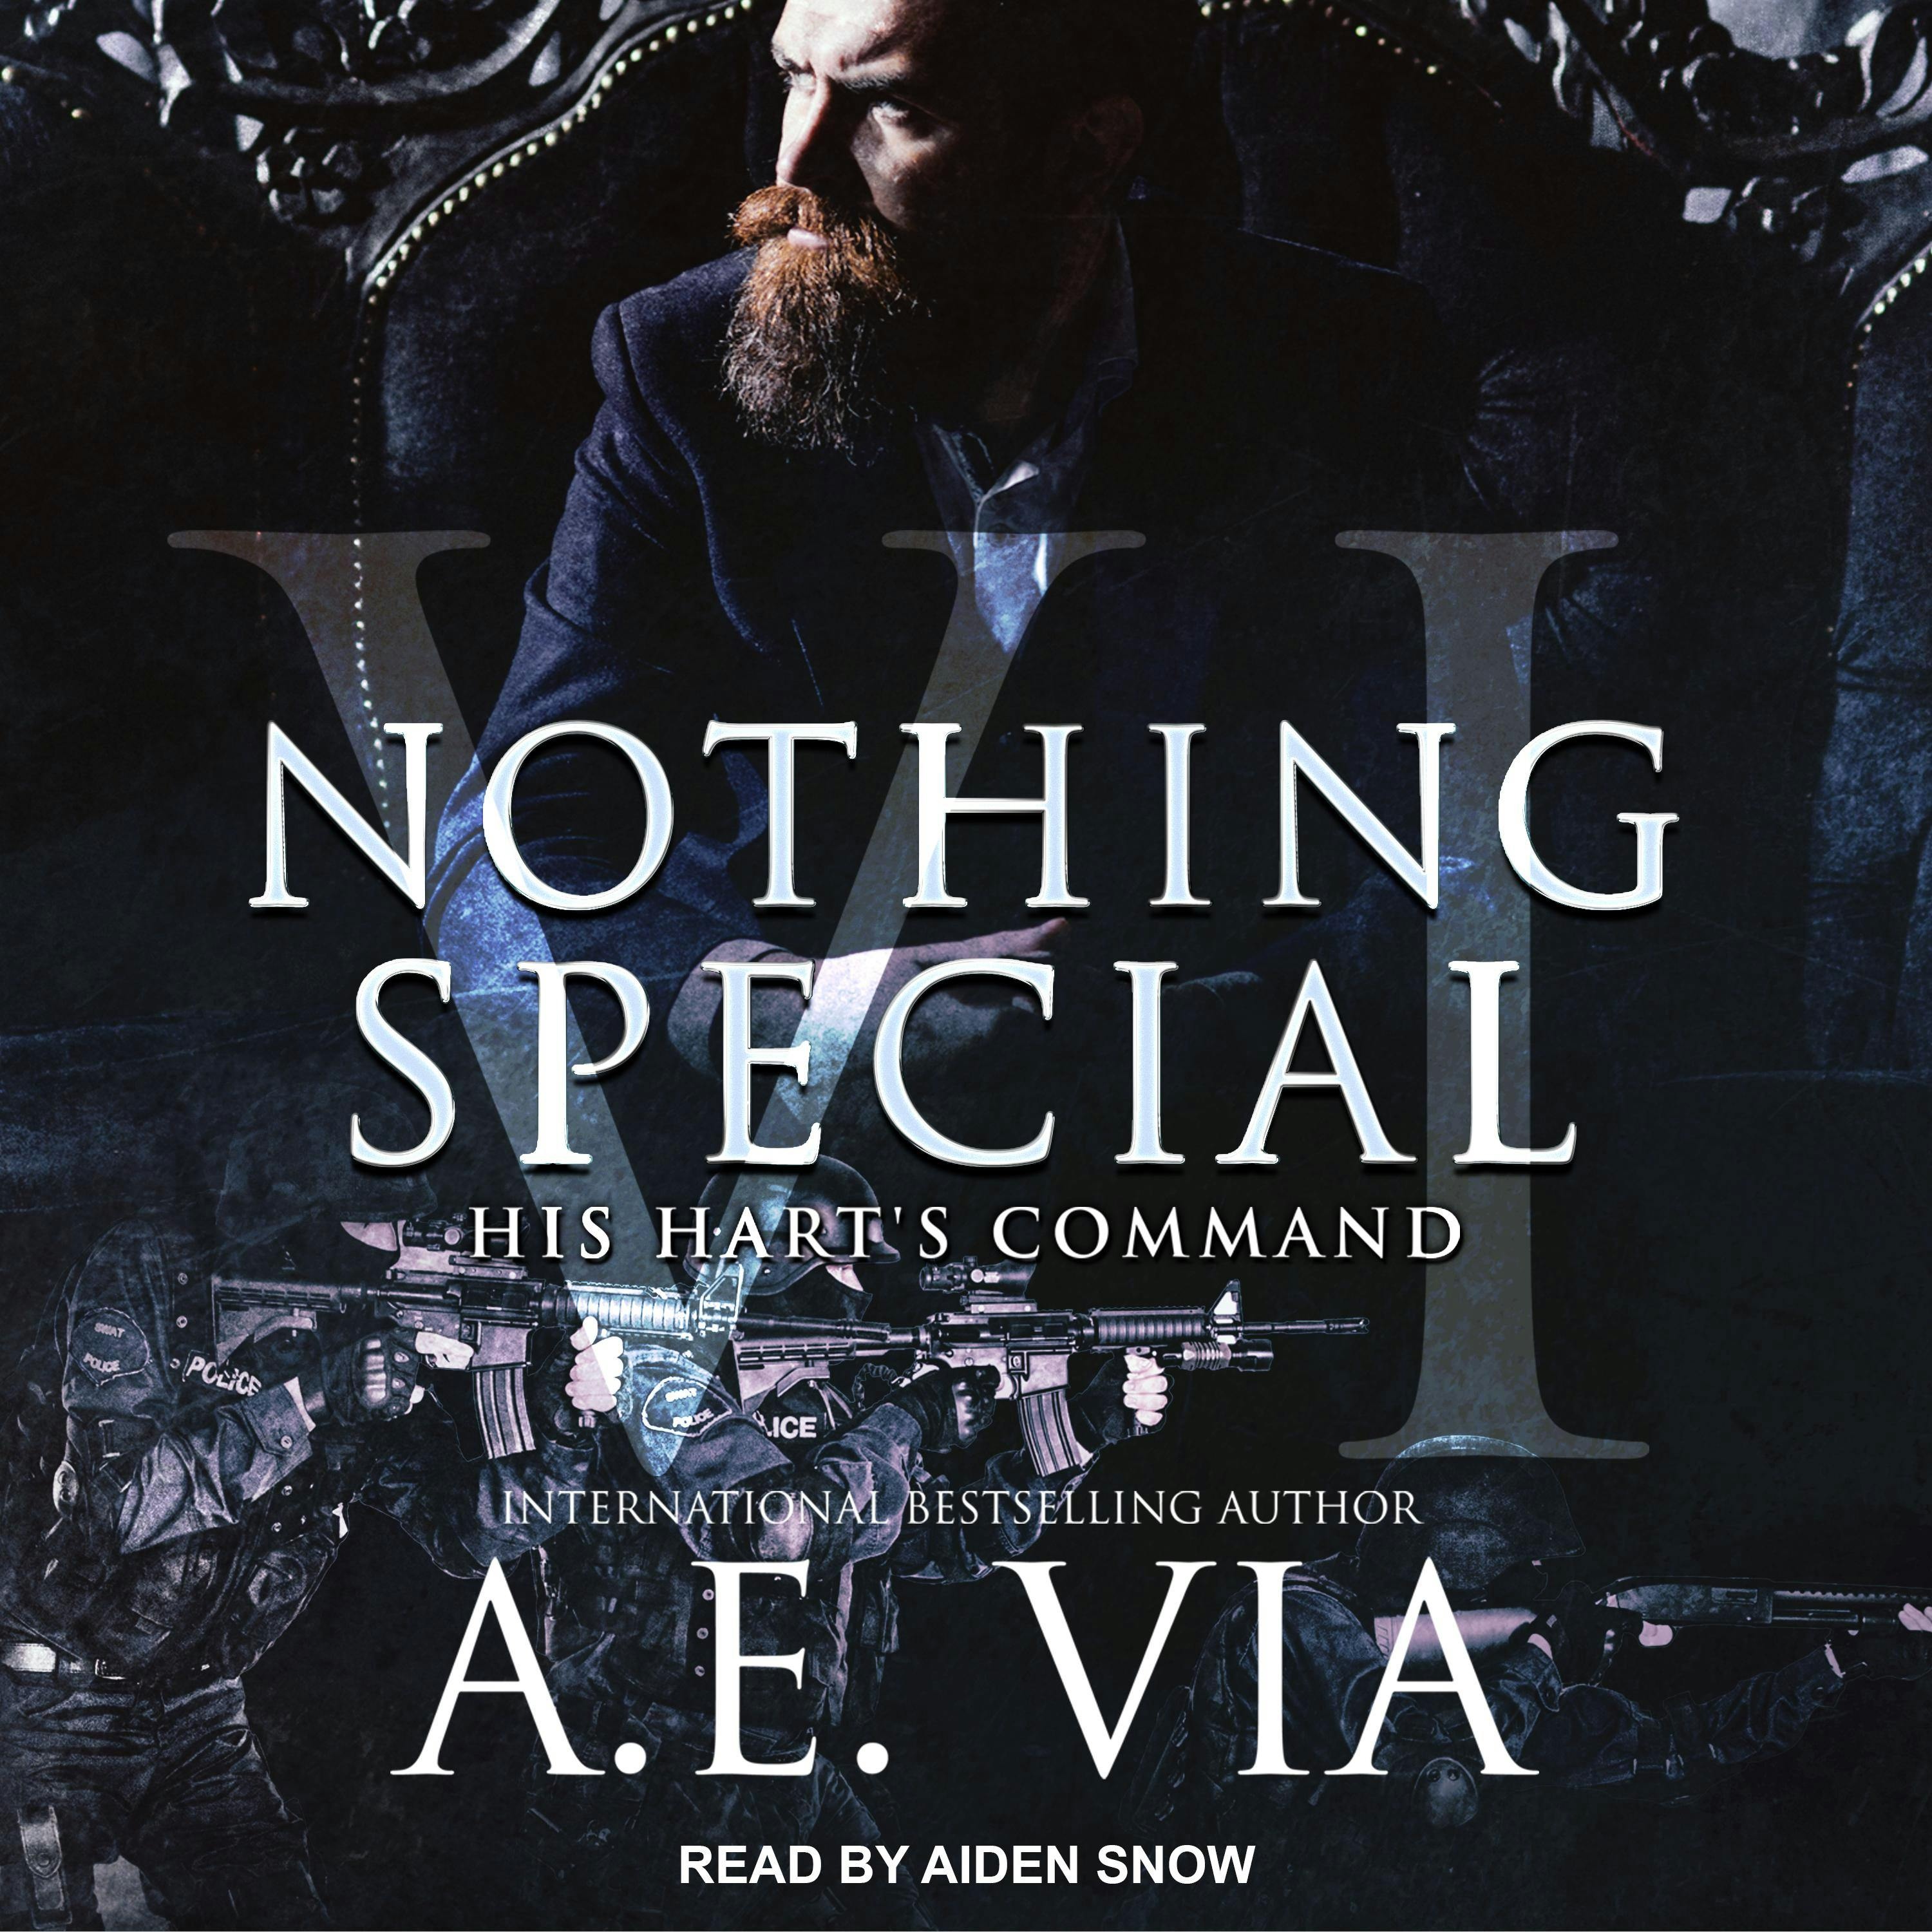 Nothing Special VI: His Hart's Command - A. E. Via